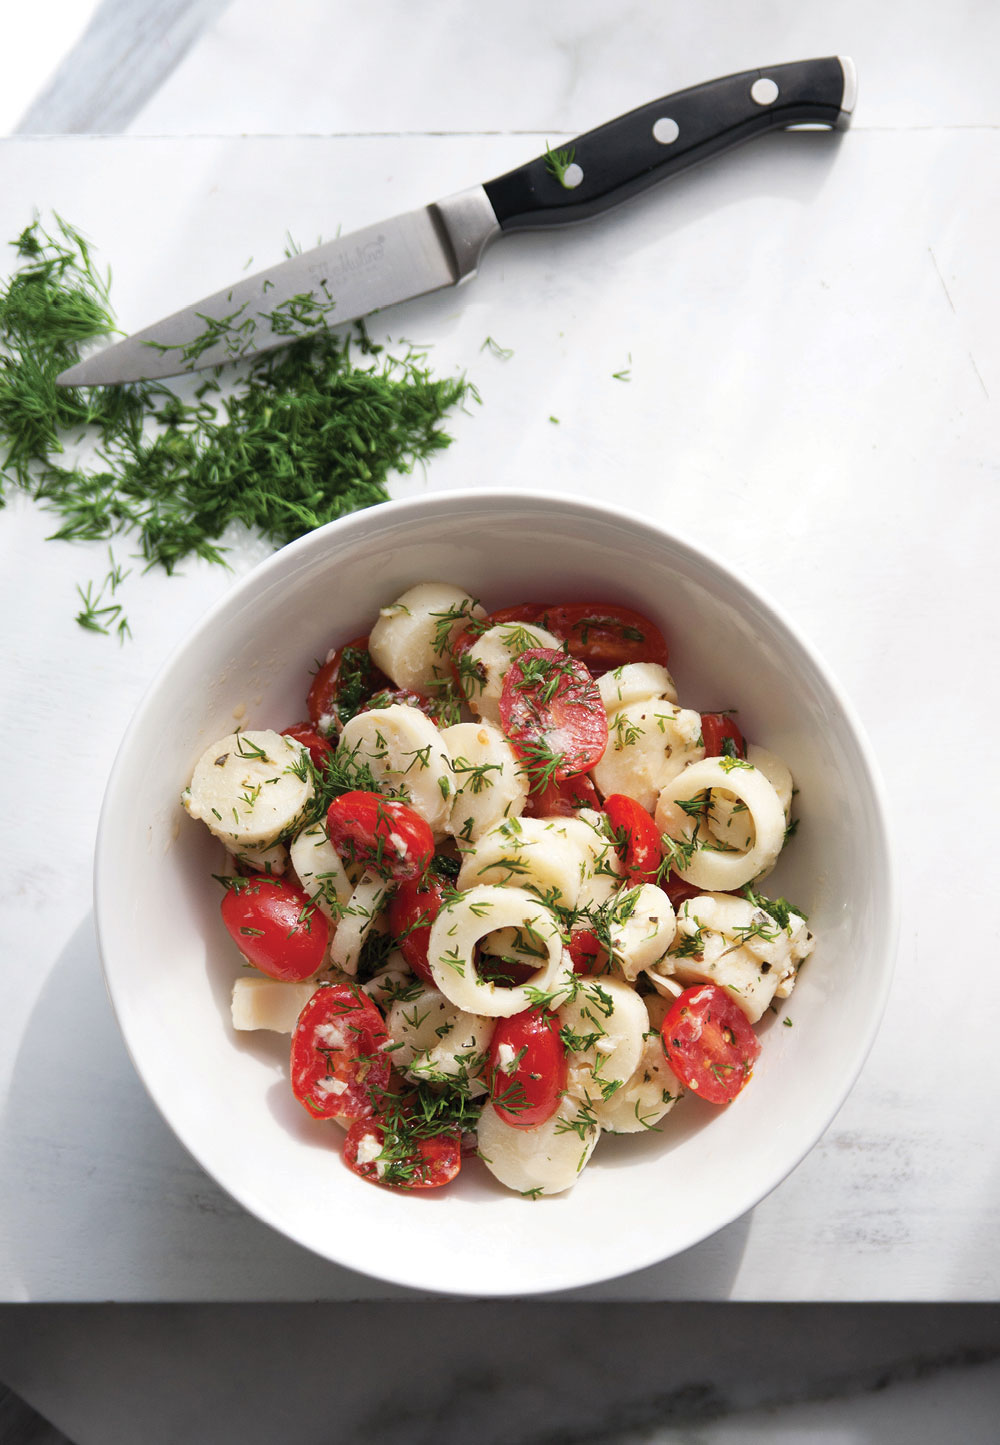 Heart-of-Palm-Tomato-Dill-Salad3